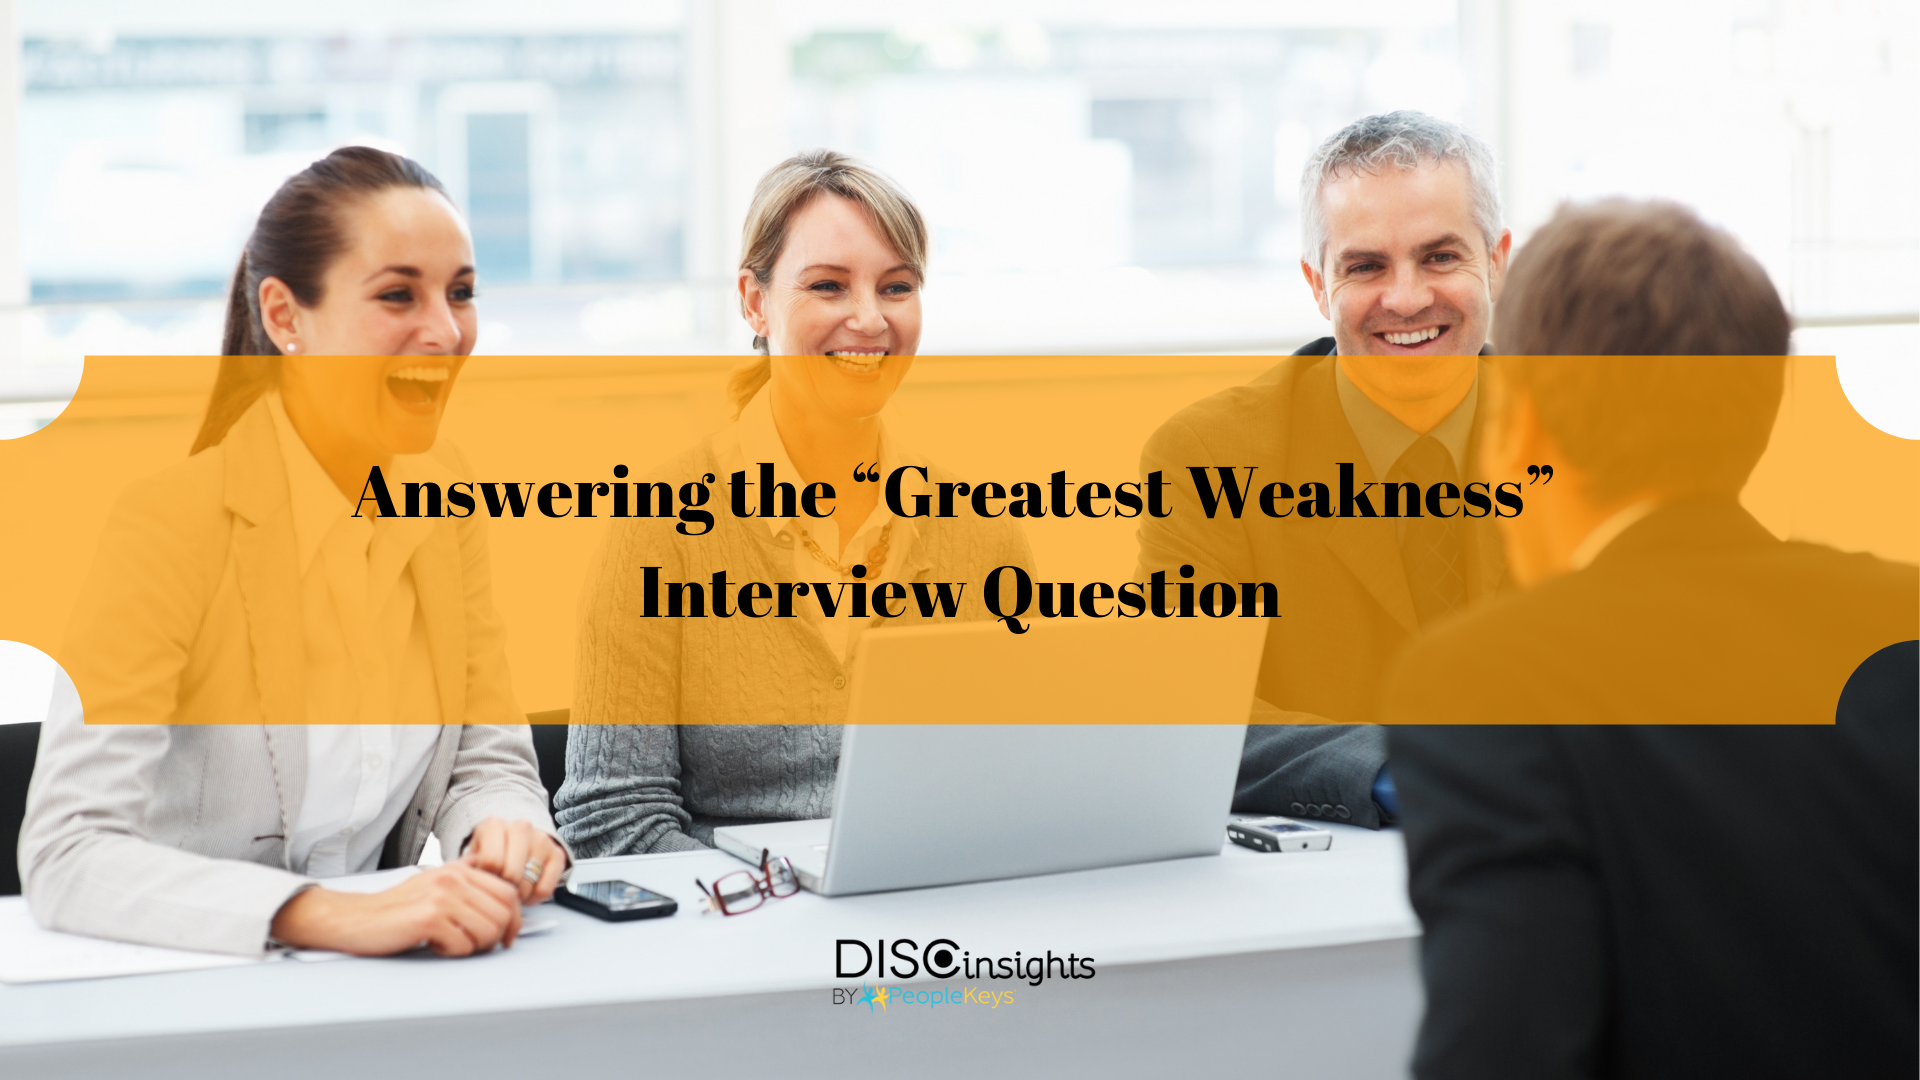 Answering the “Greatest Weakness” Interview Question